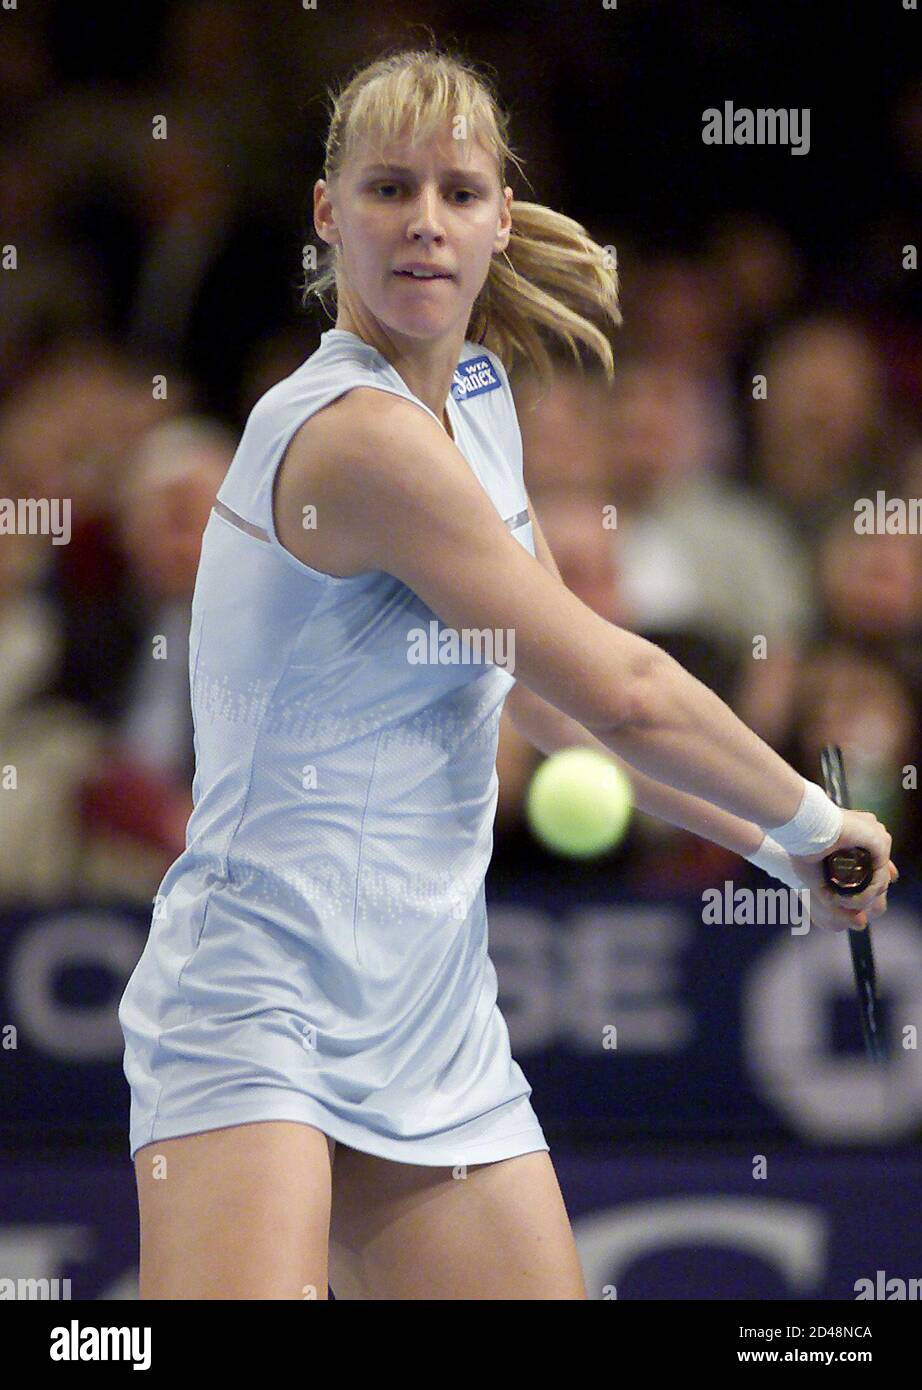 Elena Dementieva from Russia lines up a backhand to Lindsay of the United States during their first round match at the Chase Championships of the WTA Tour at New York's